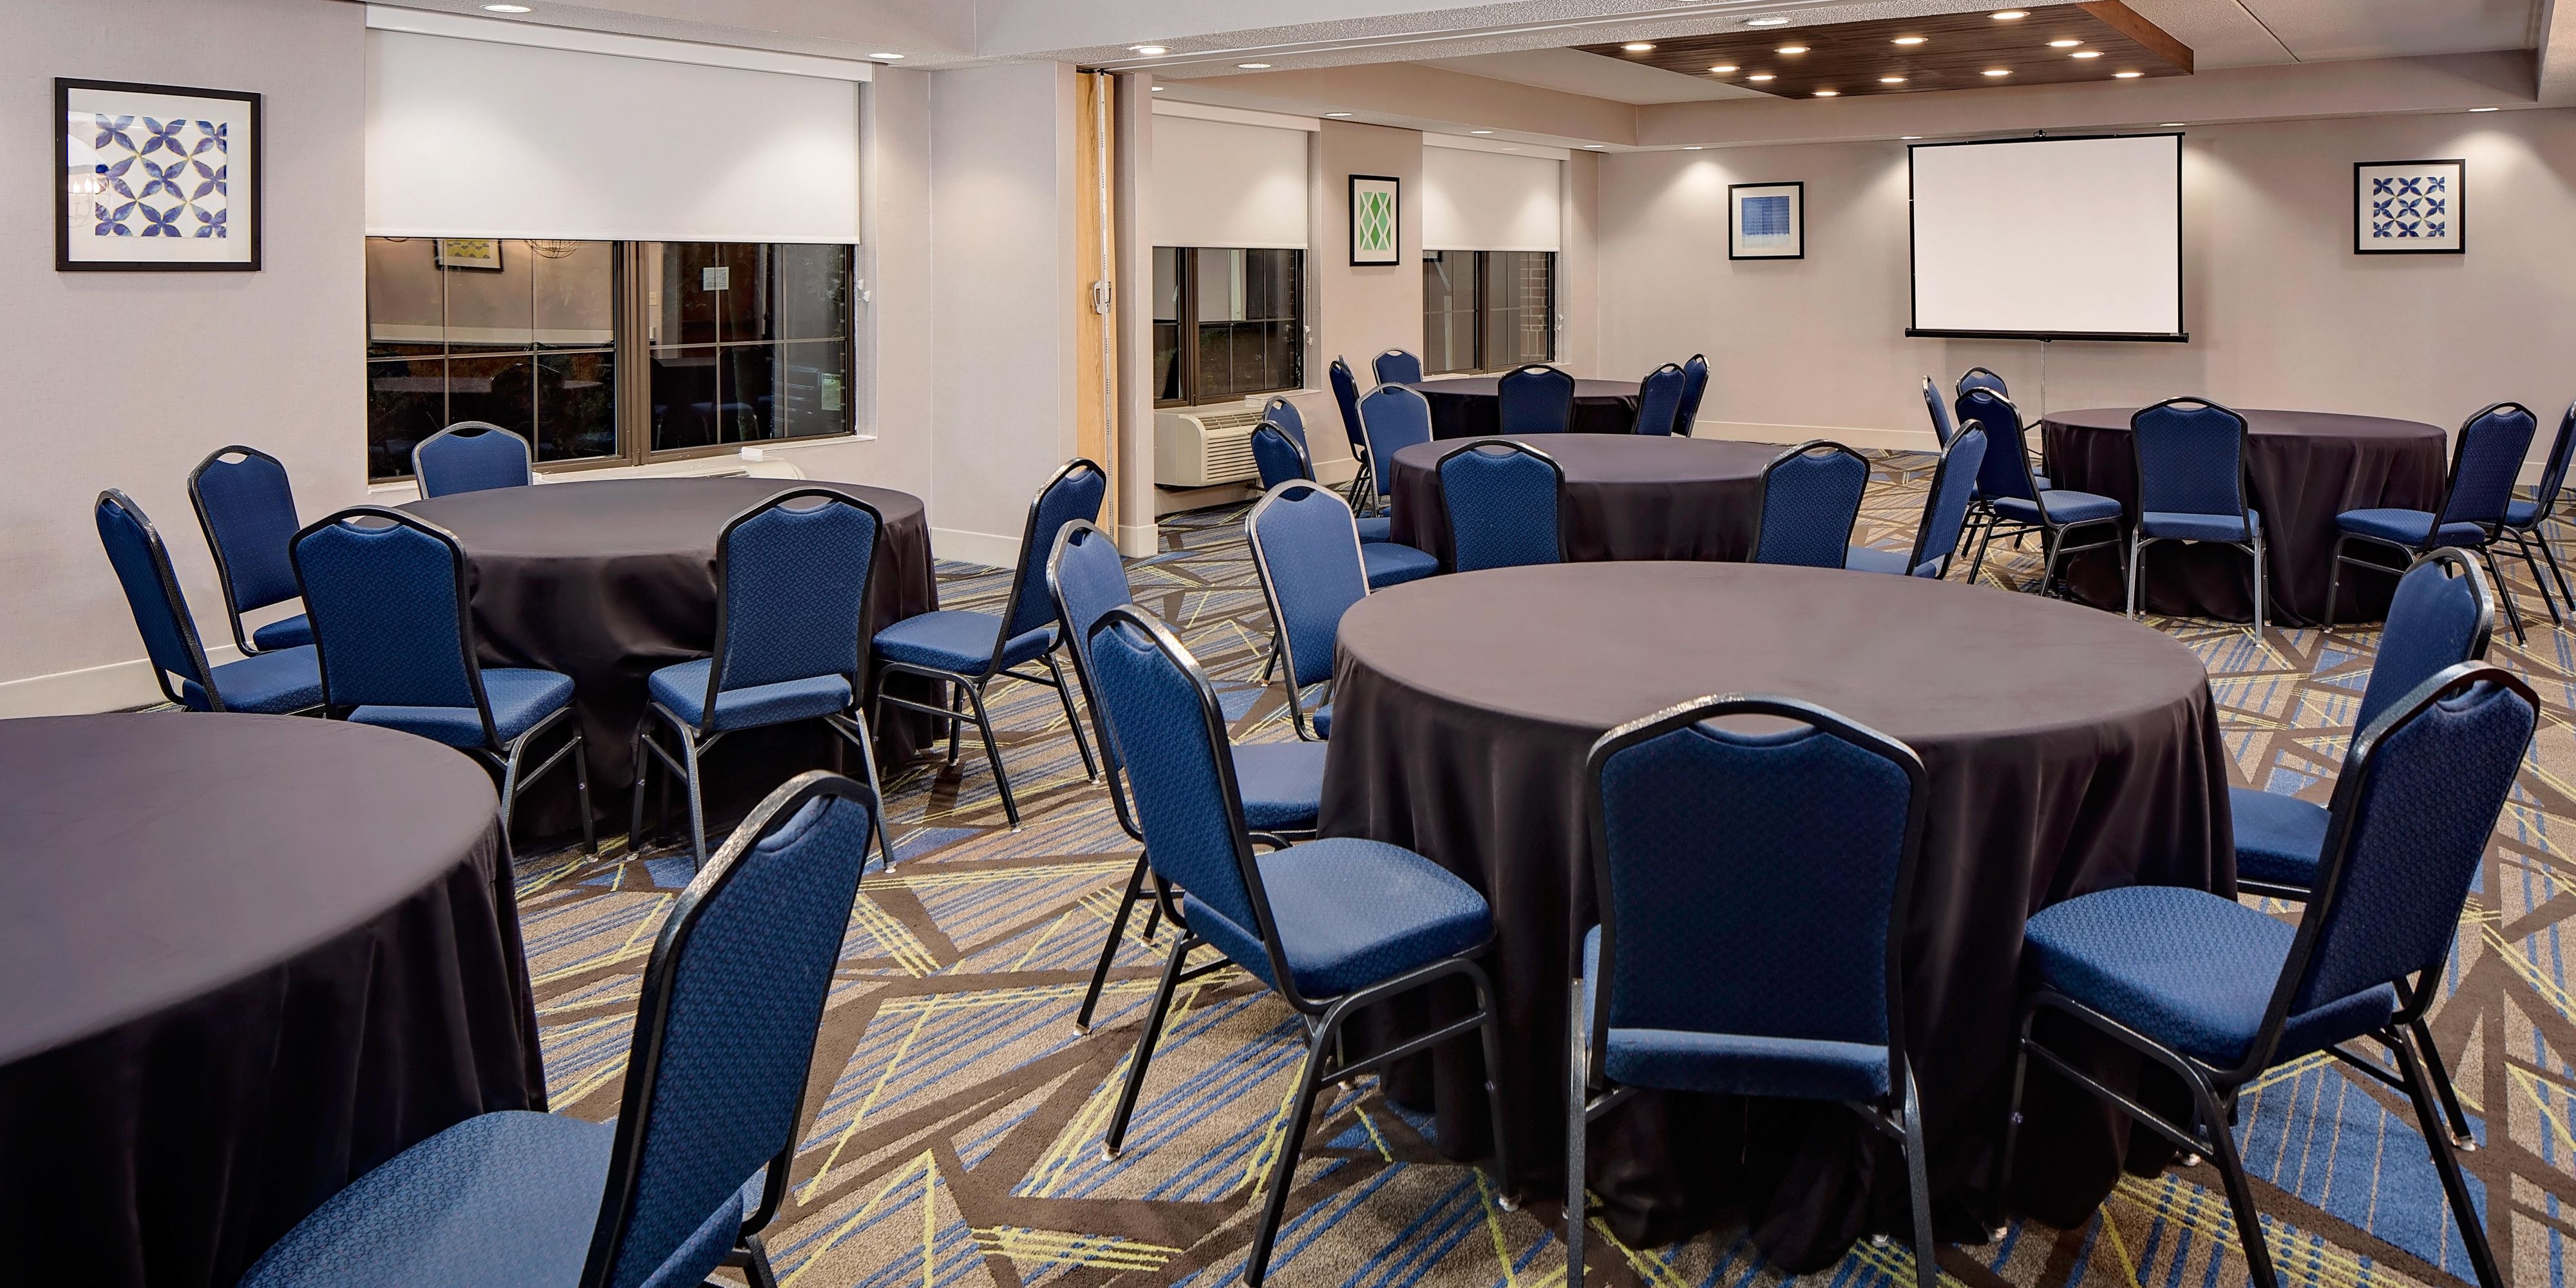 Our meeting and event space has over 1,250 square feet to host your event. Space hold up to 60 guest. We offer the flexibility of bringing in your own food or hiring your own caterer. Contact our sales office cscott@twintierhospitality.com for more information! 